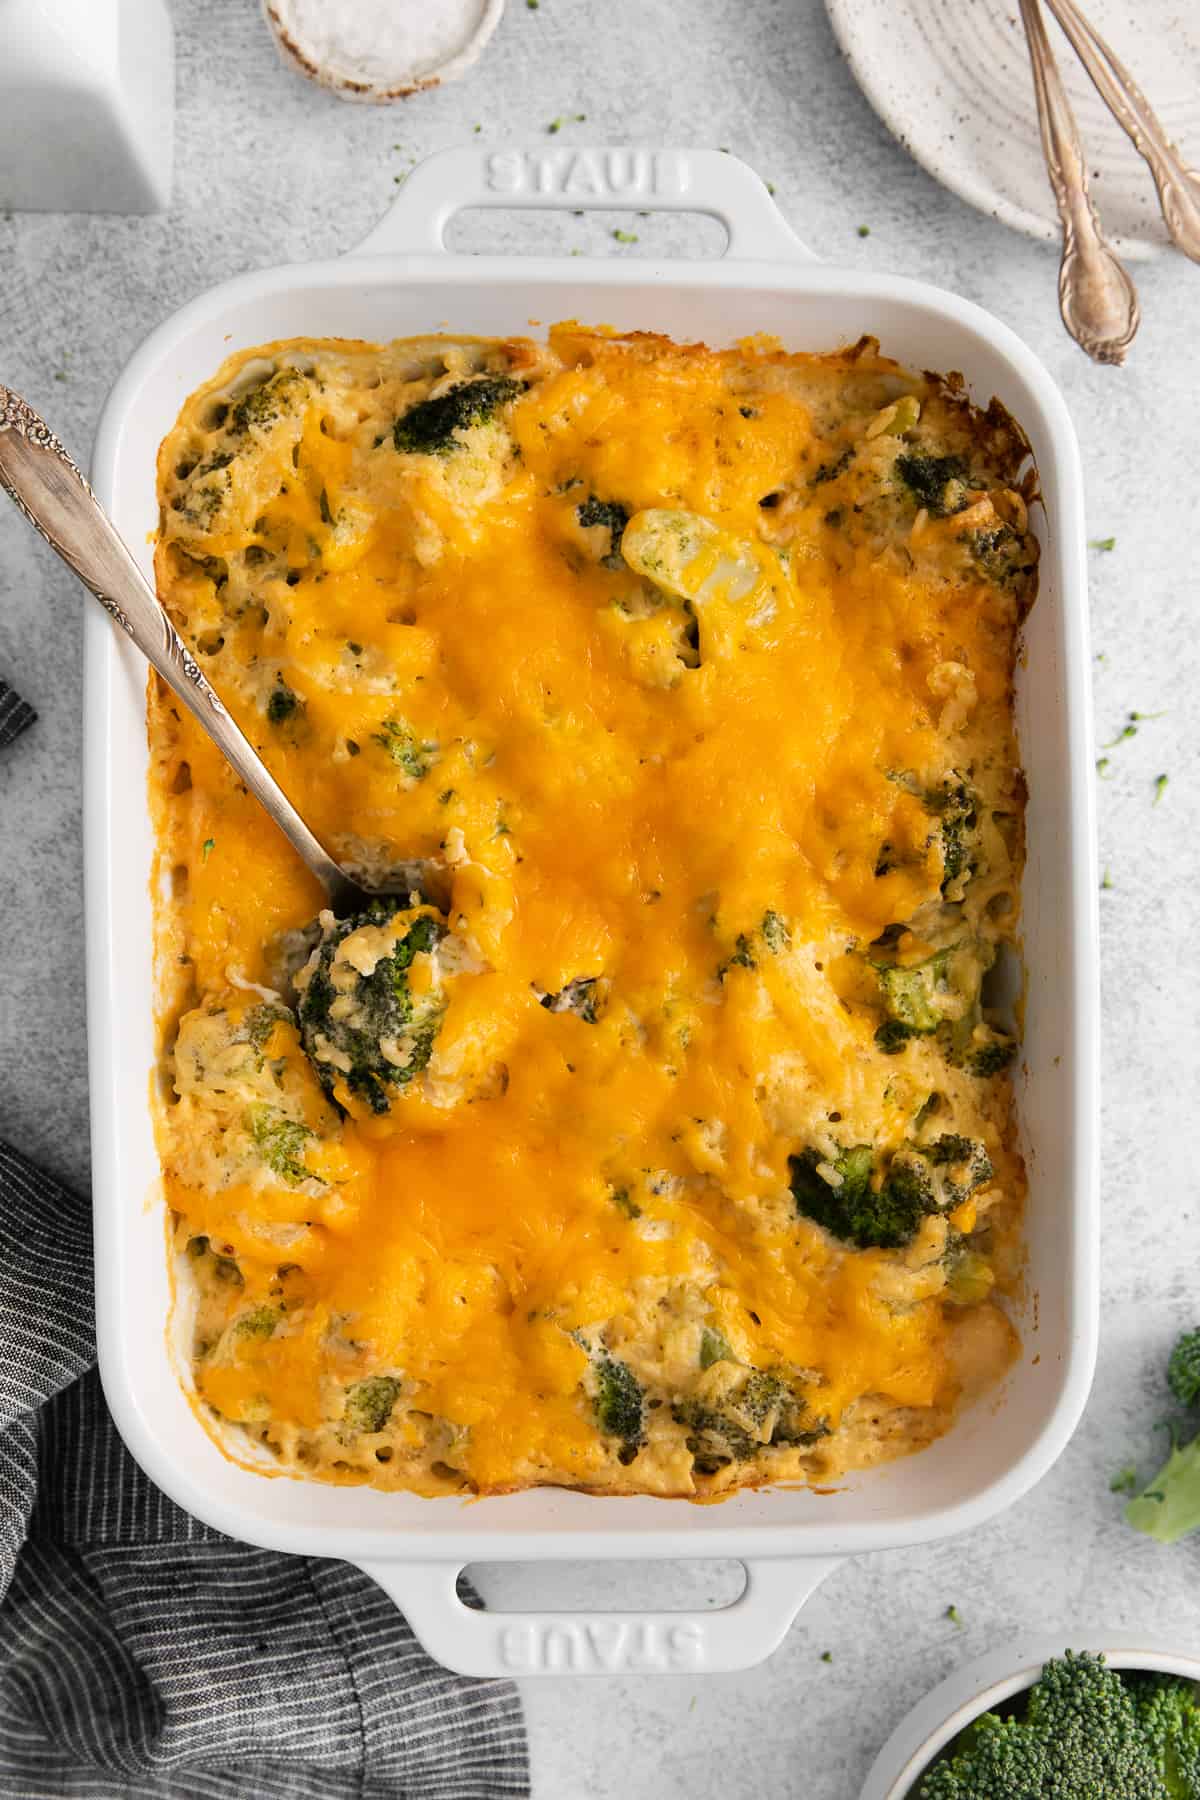 Broccoli cheese casserole topped with cheddar cheese in a casserole dish.